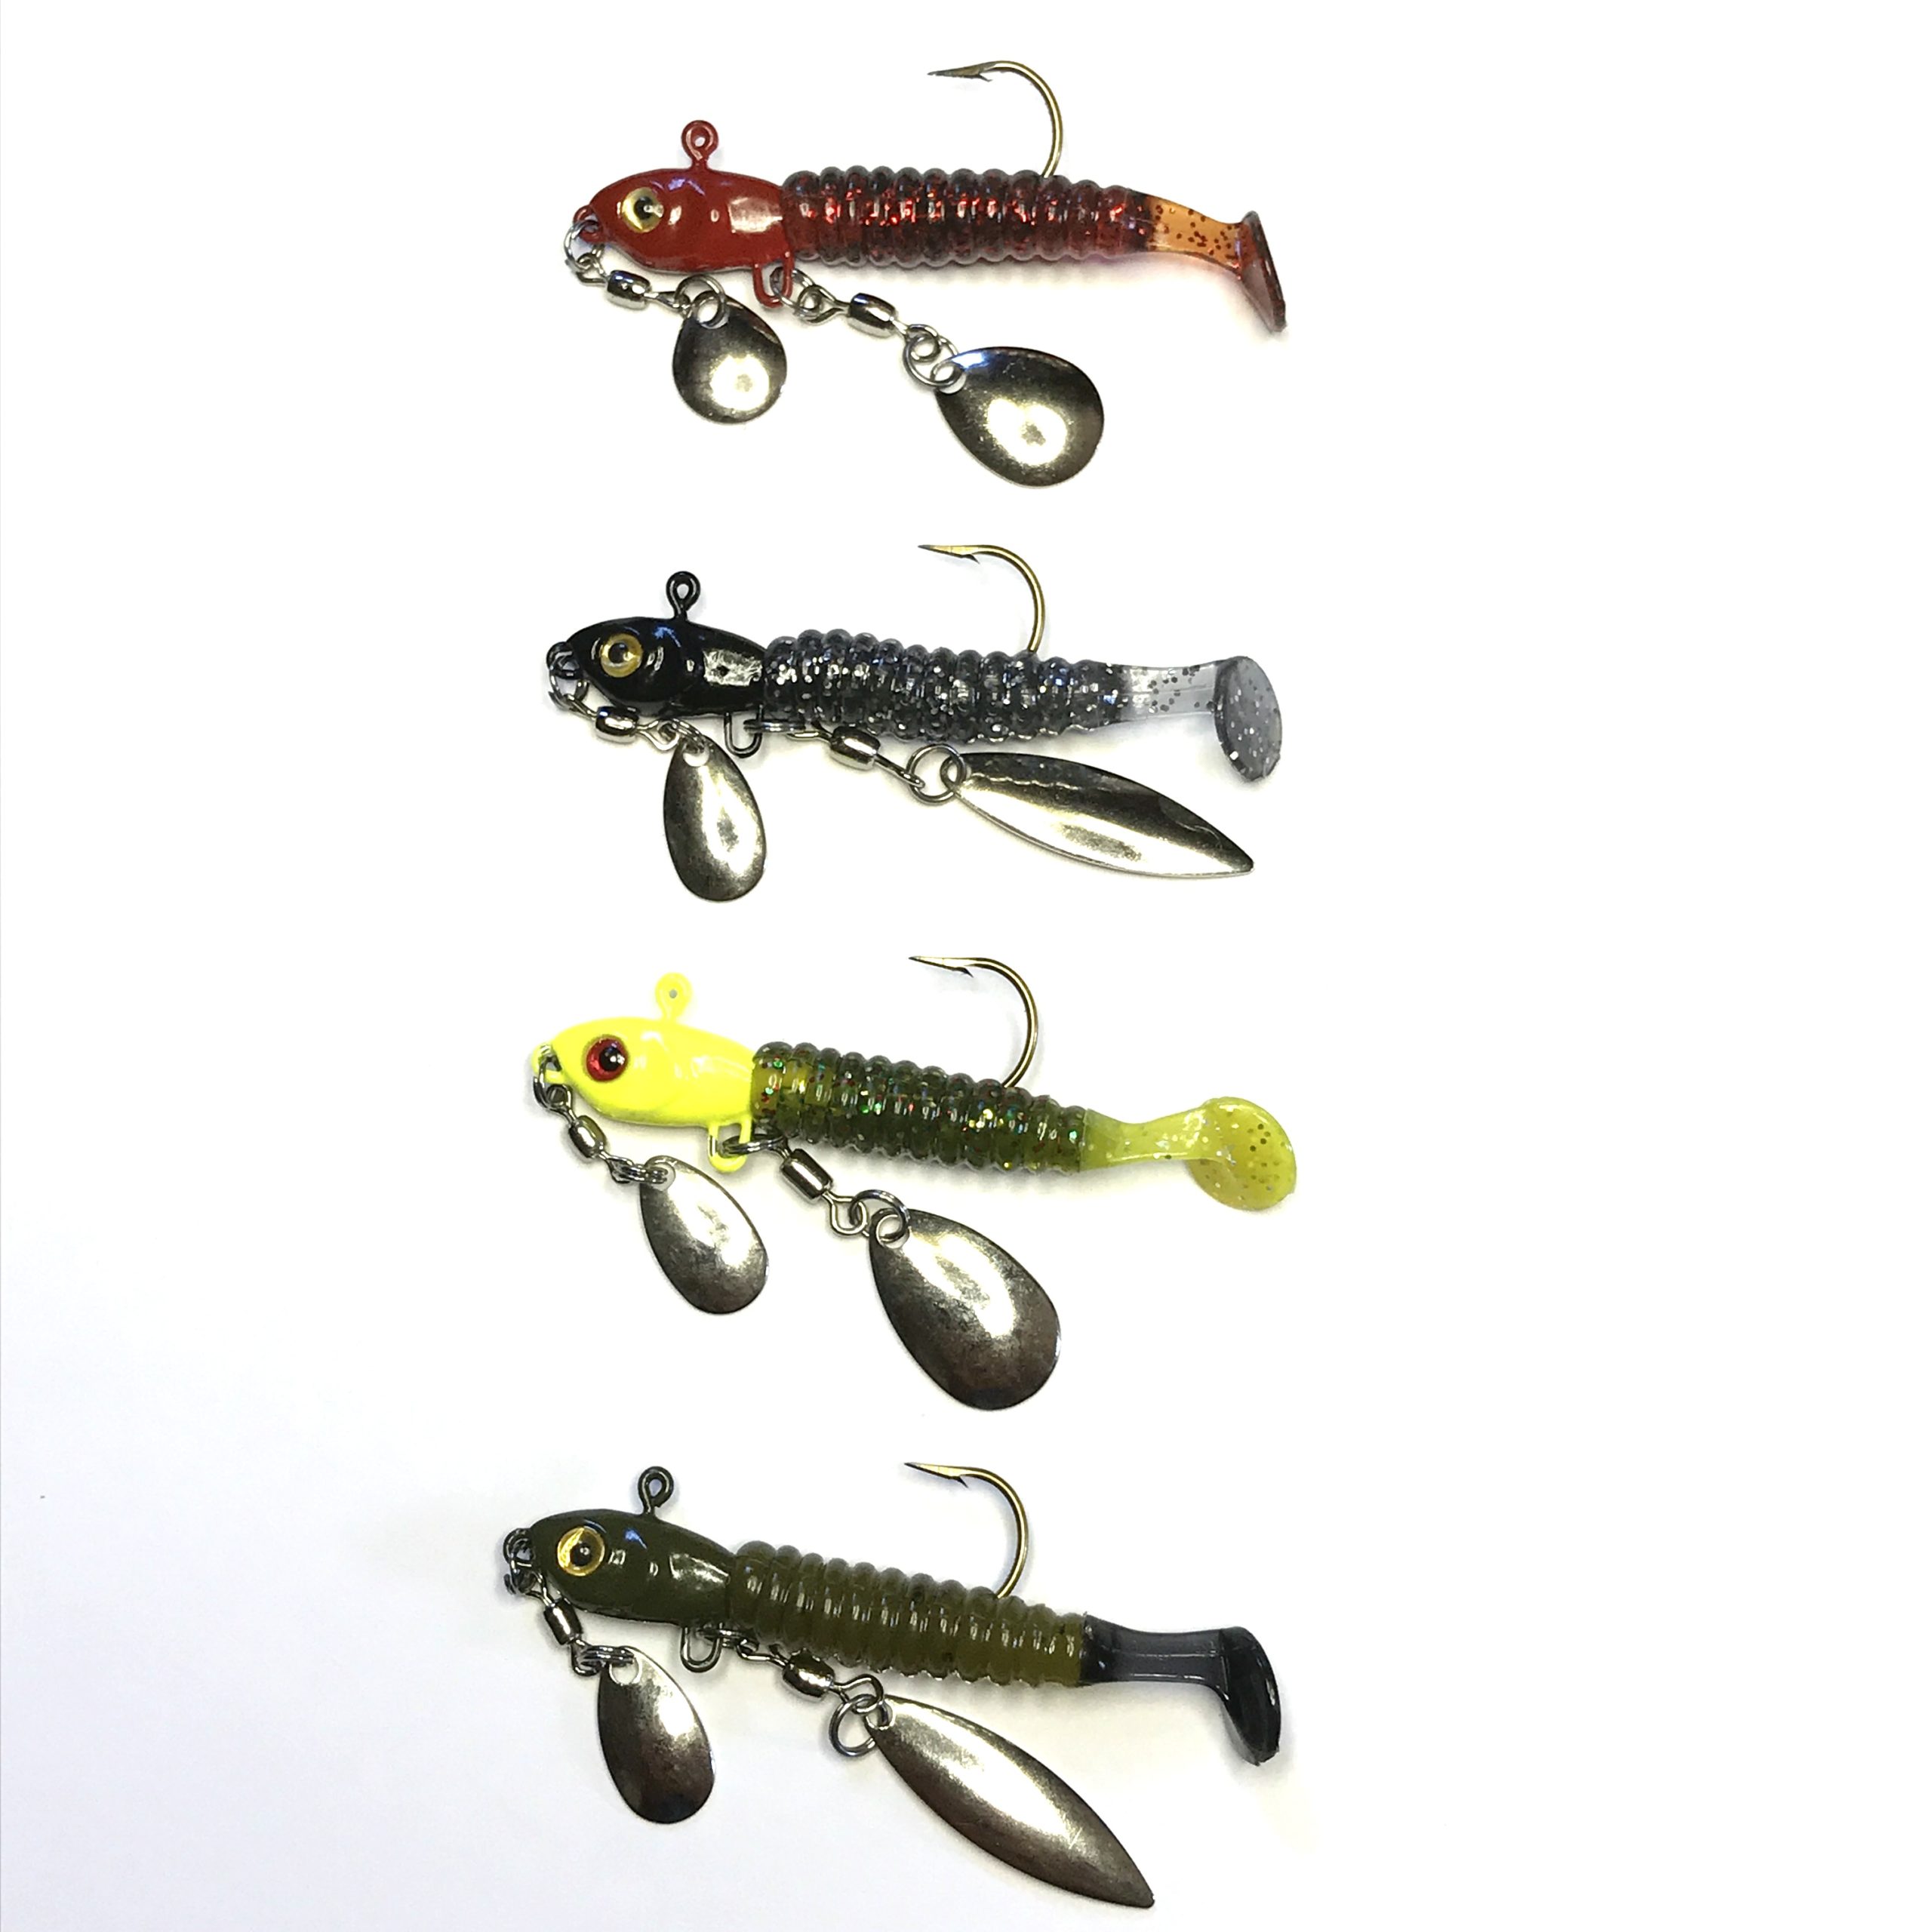 Crappie Fishing Lures